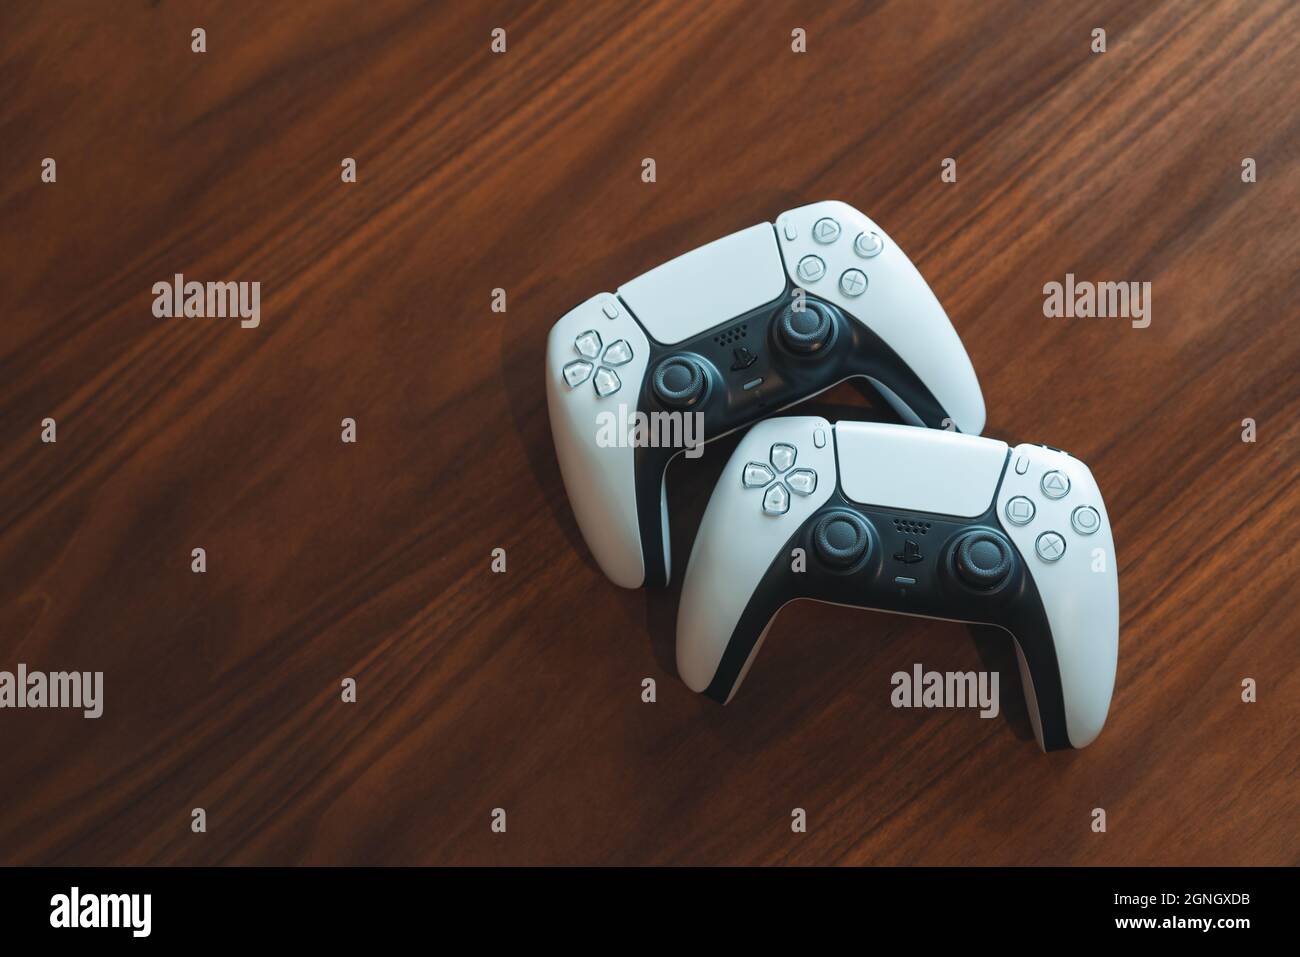 London, UK - May 25, 2021: Playstation 5 (PS5) controllers on a table, copy  space. Playstation 5 is the latest video game console by Sony release in N  Stock Photo - Alamy